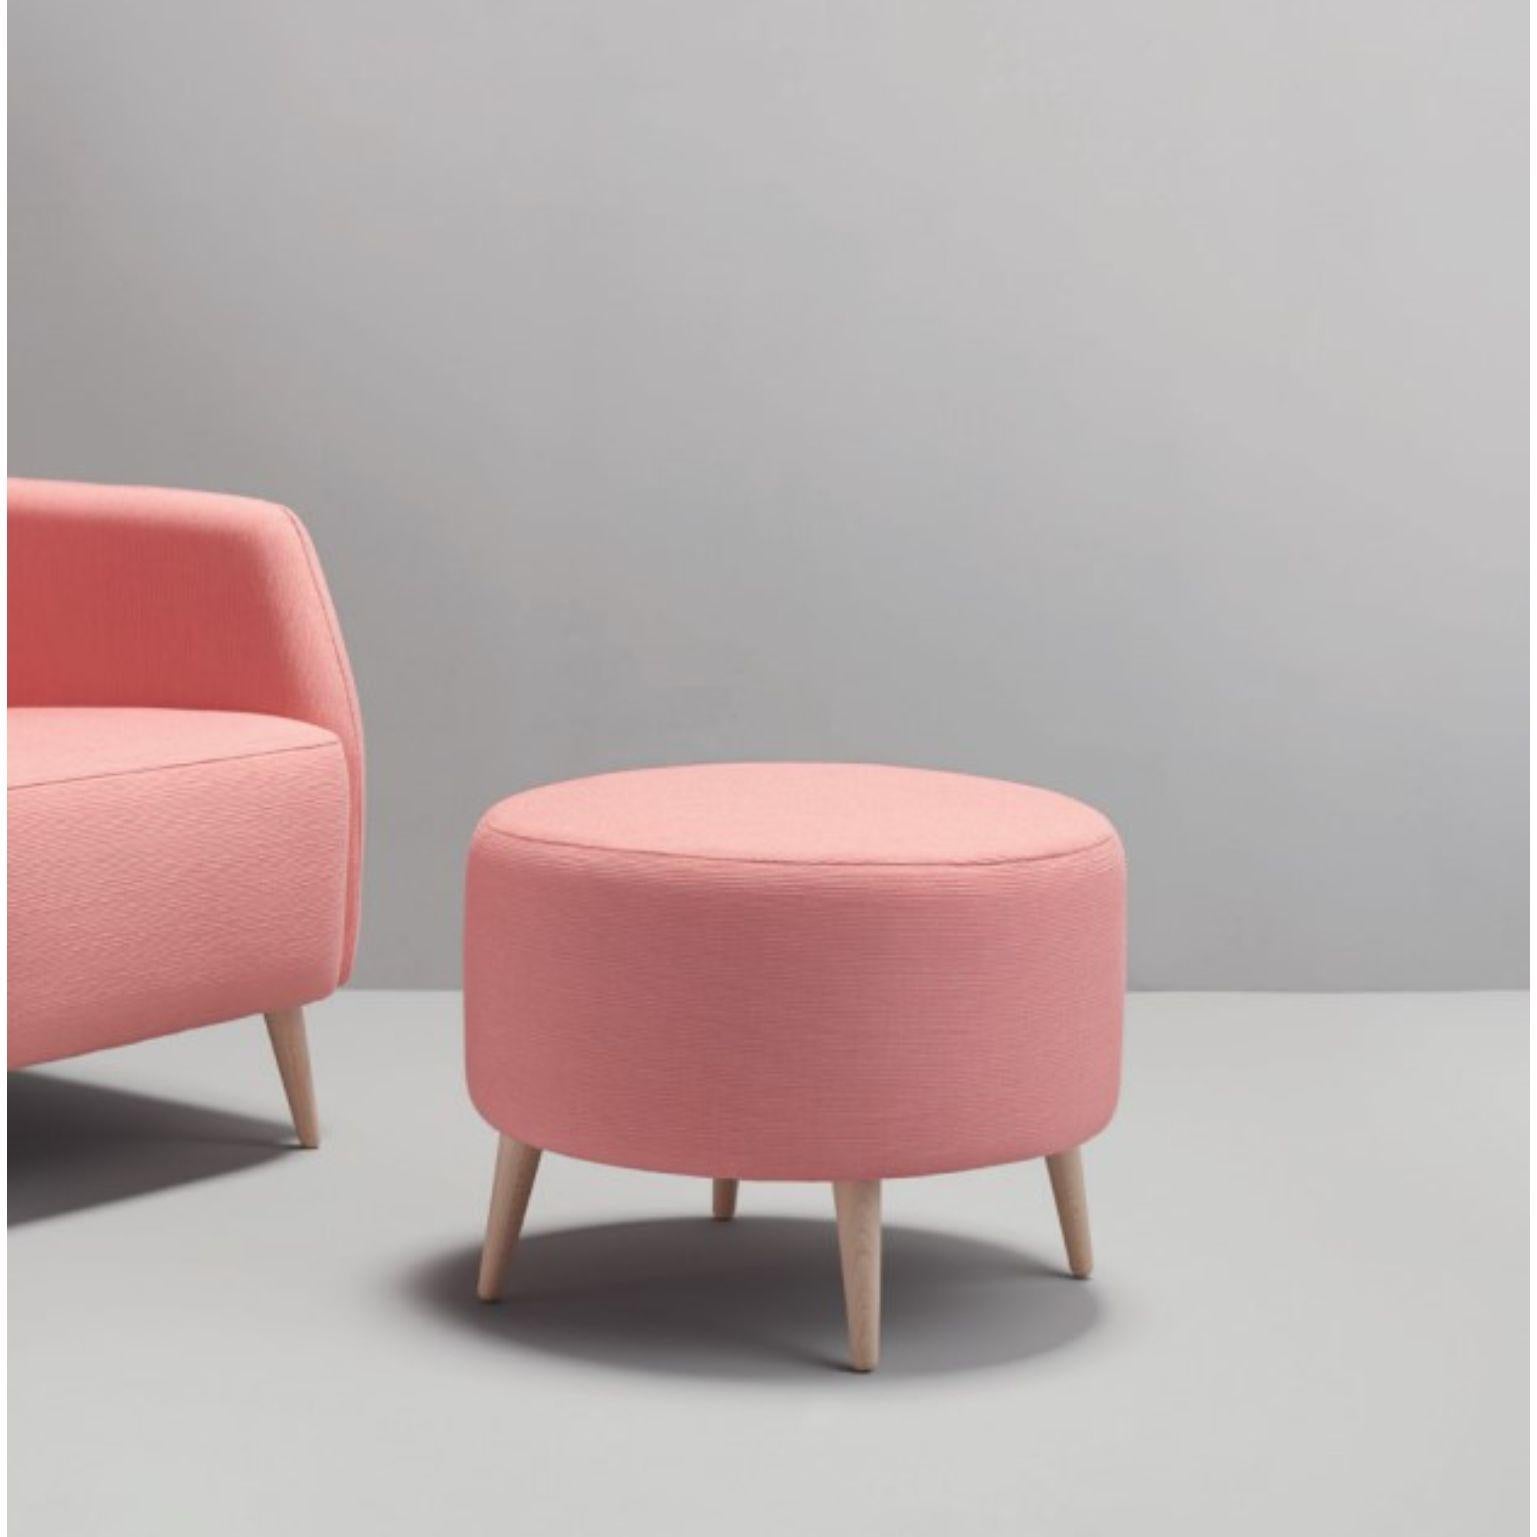 Alice ottoman - round by Pepe Albargues 
Dimensions: W54, D54, H41
Materials: Pine wood structure reinforced with plywood and tablex.
Foam CMHR (high resilience and flame retardant) for all our cushion filling systems.
Beech wooden legs.

Also